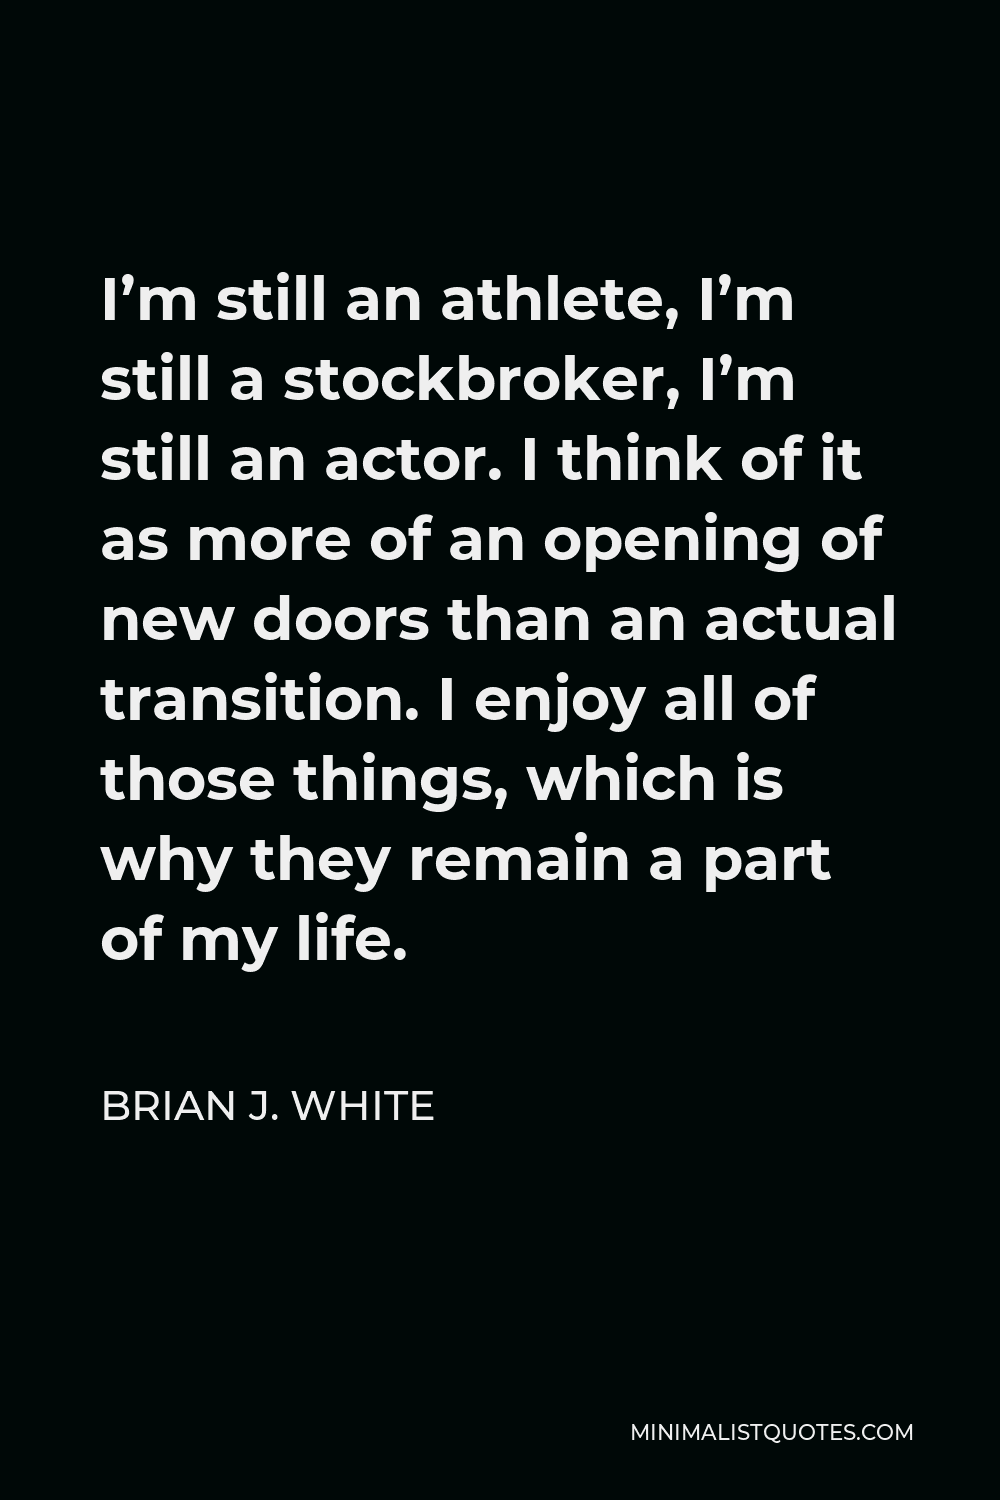 Brian J. White Quote - I’m still an athlete, I’m still a stockbroker, I’m still an actor. I think of it as more of an opening of new doors than an actual transition. I enjoy all of those things, which is why they remain a part of my life.